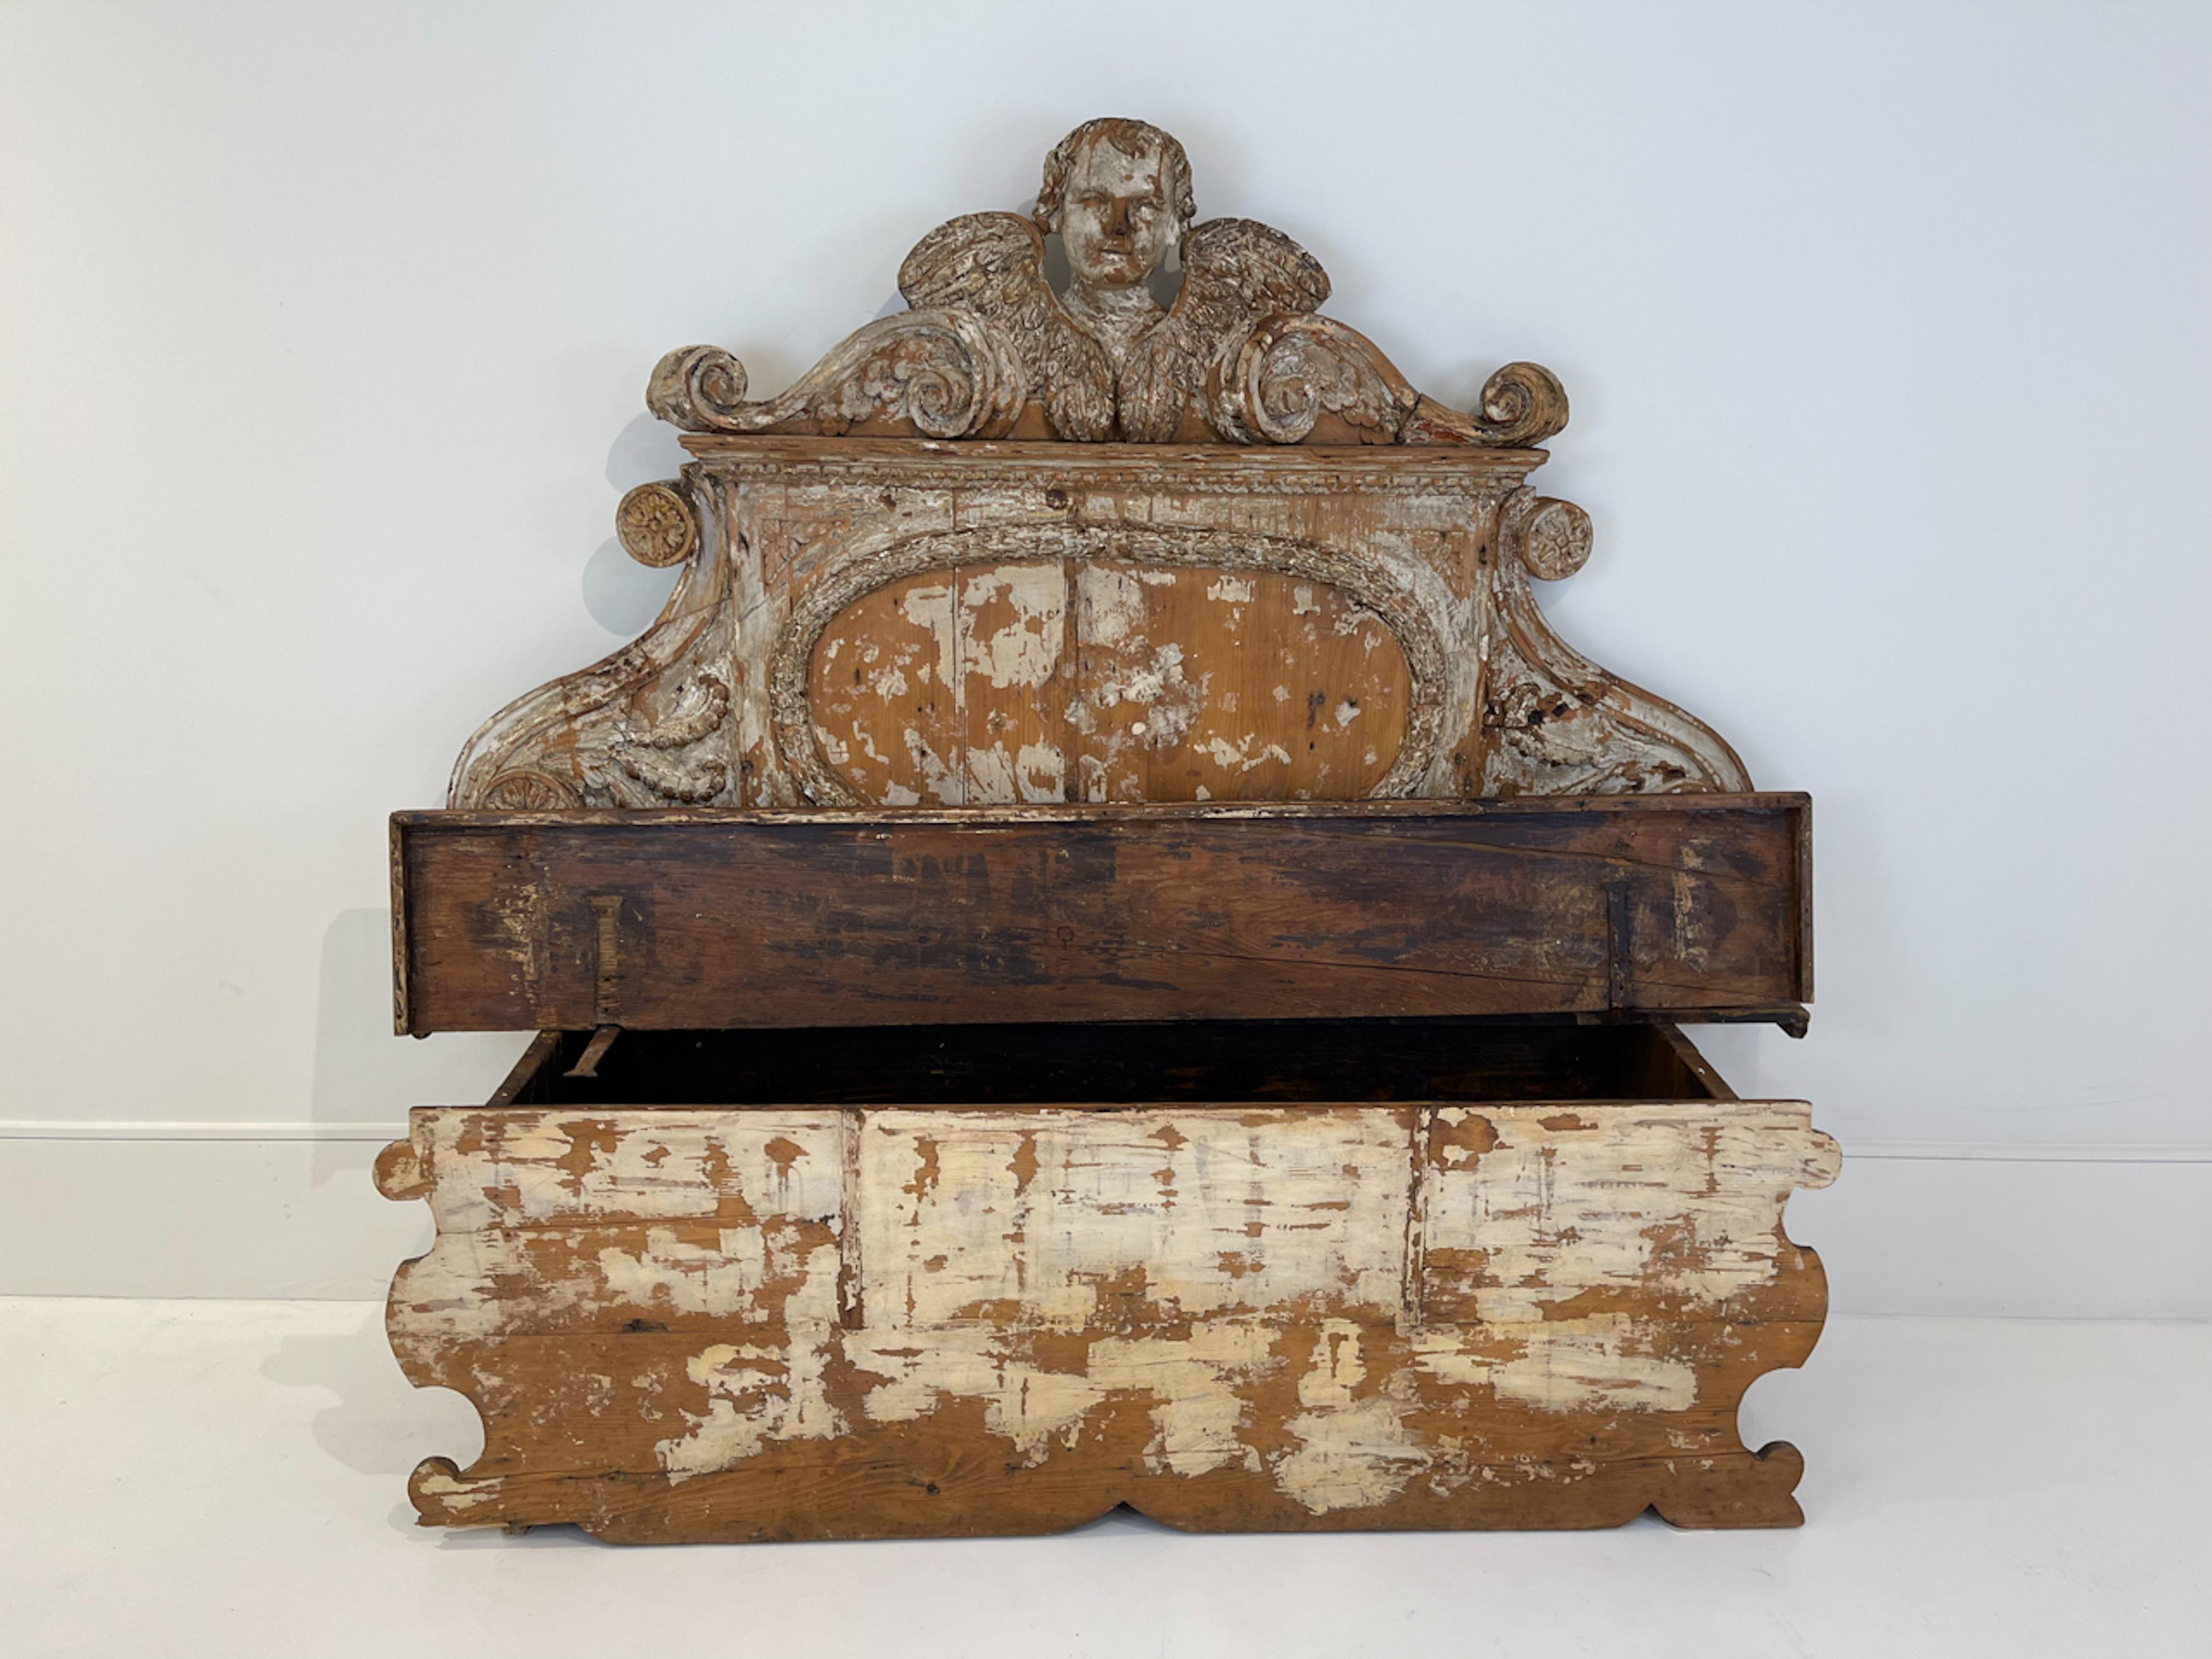 Hand-Carved Italian Baroque Bench with Angel Carving, 18th Century